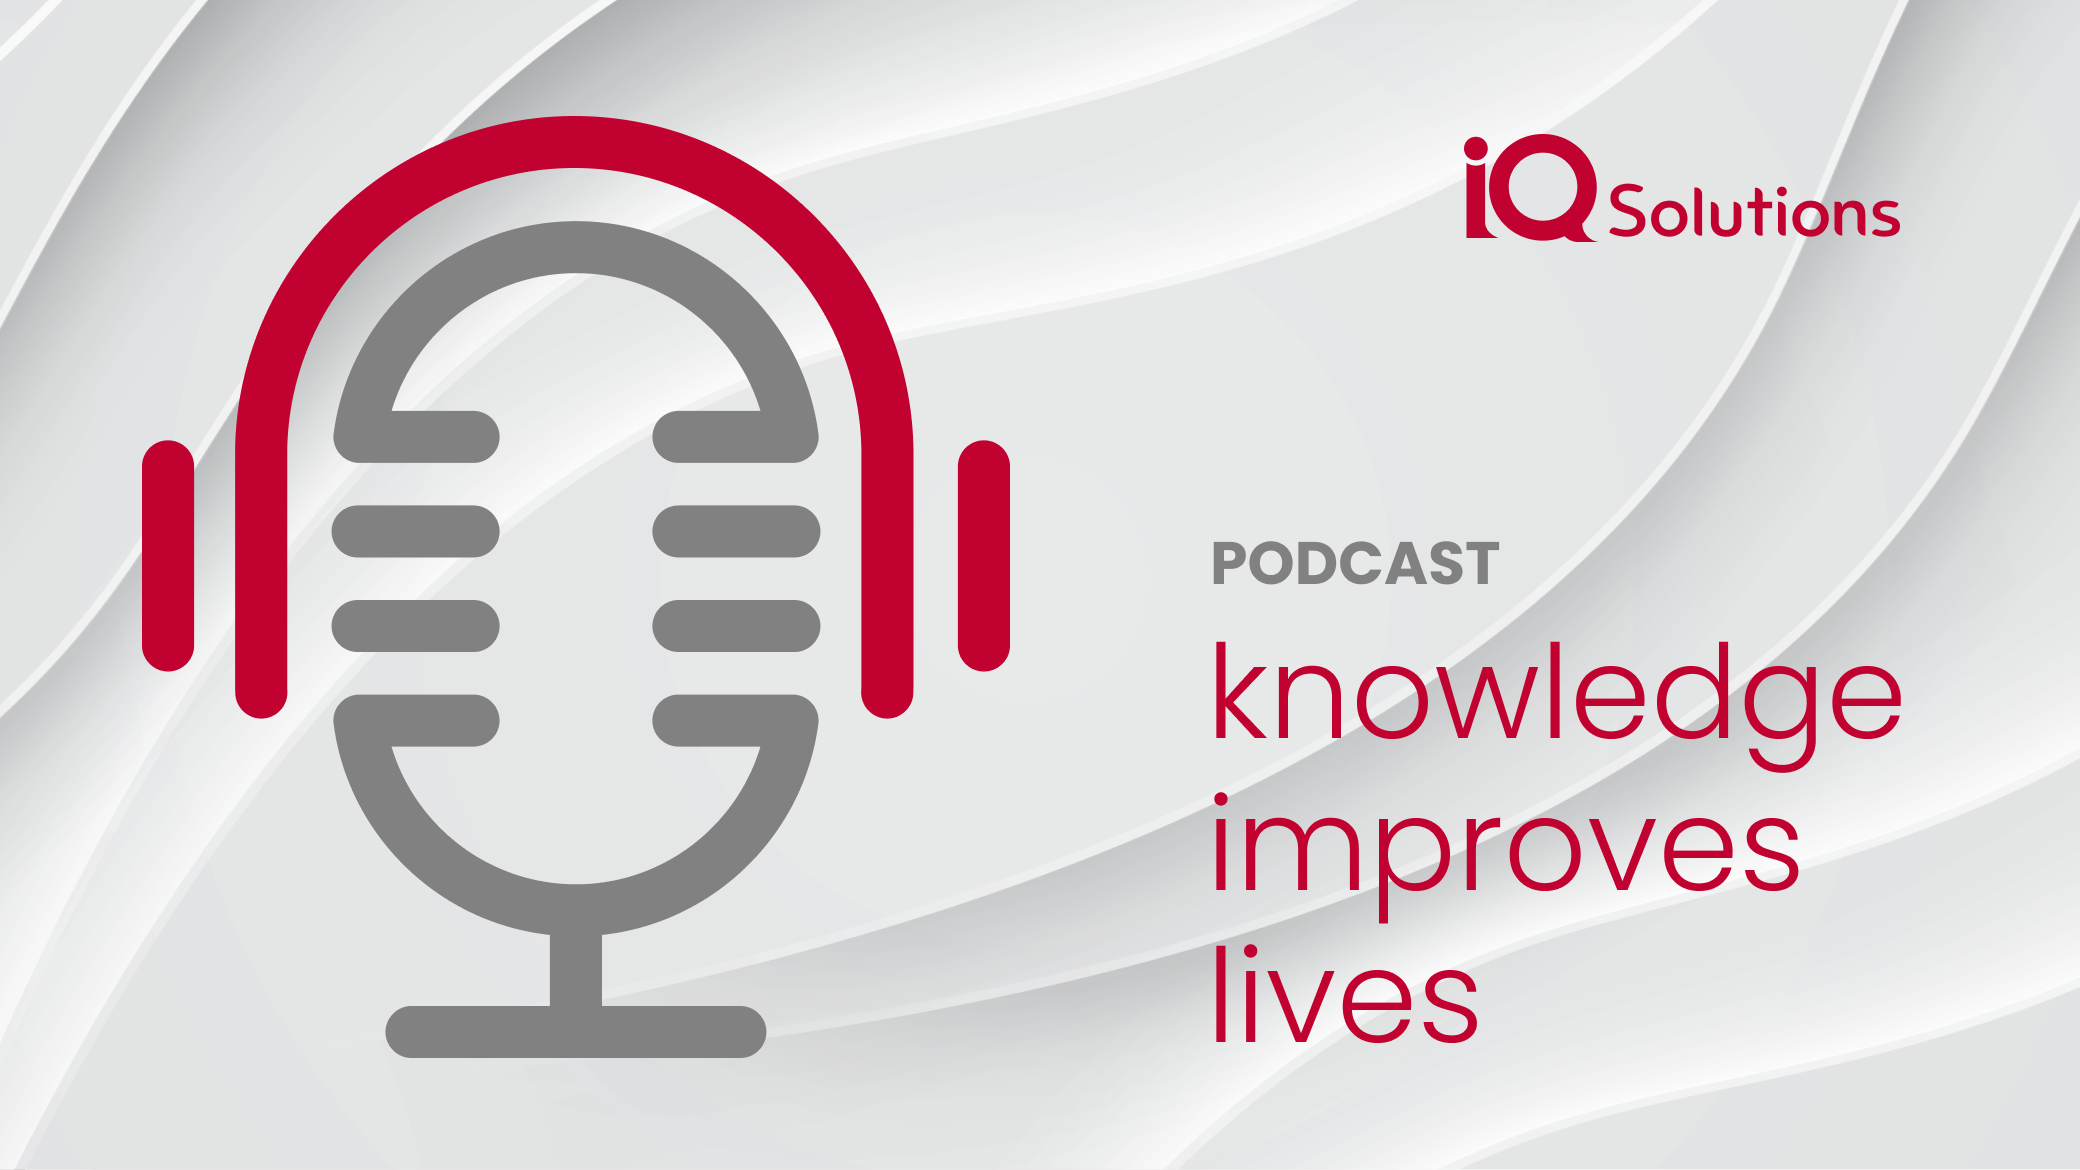 IQ Solutions logo with microphone icon and text stating podcast, knowledge improves lives.